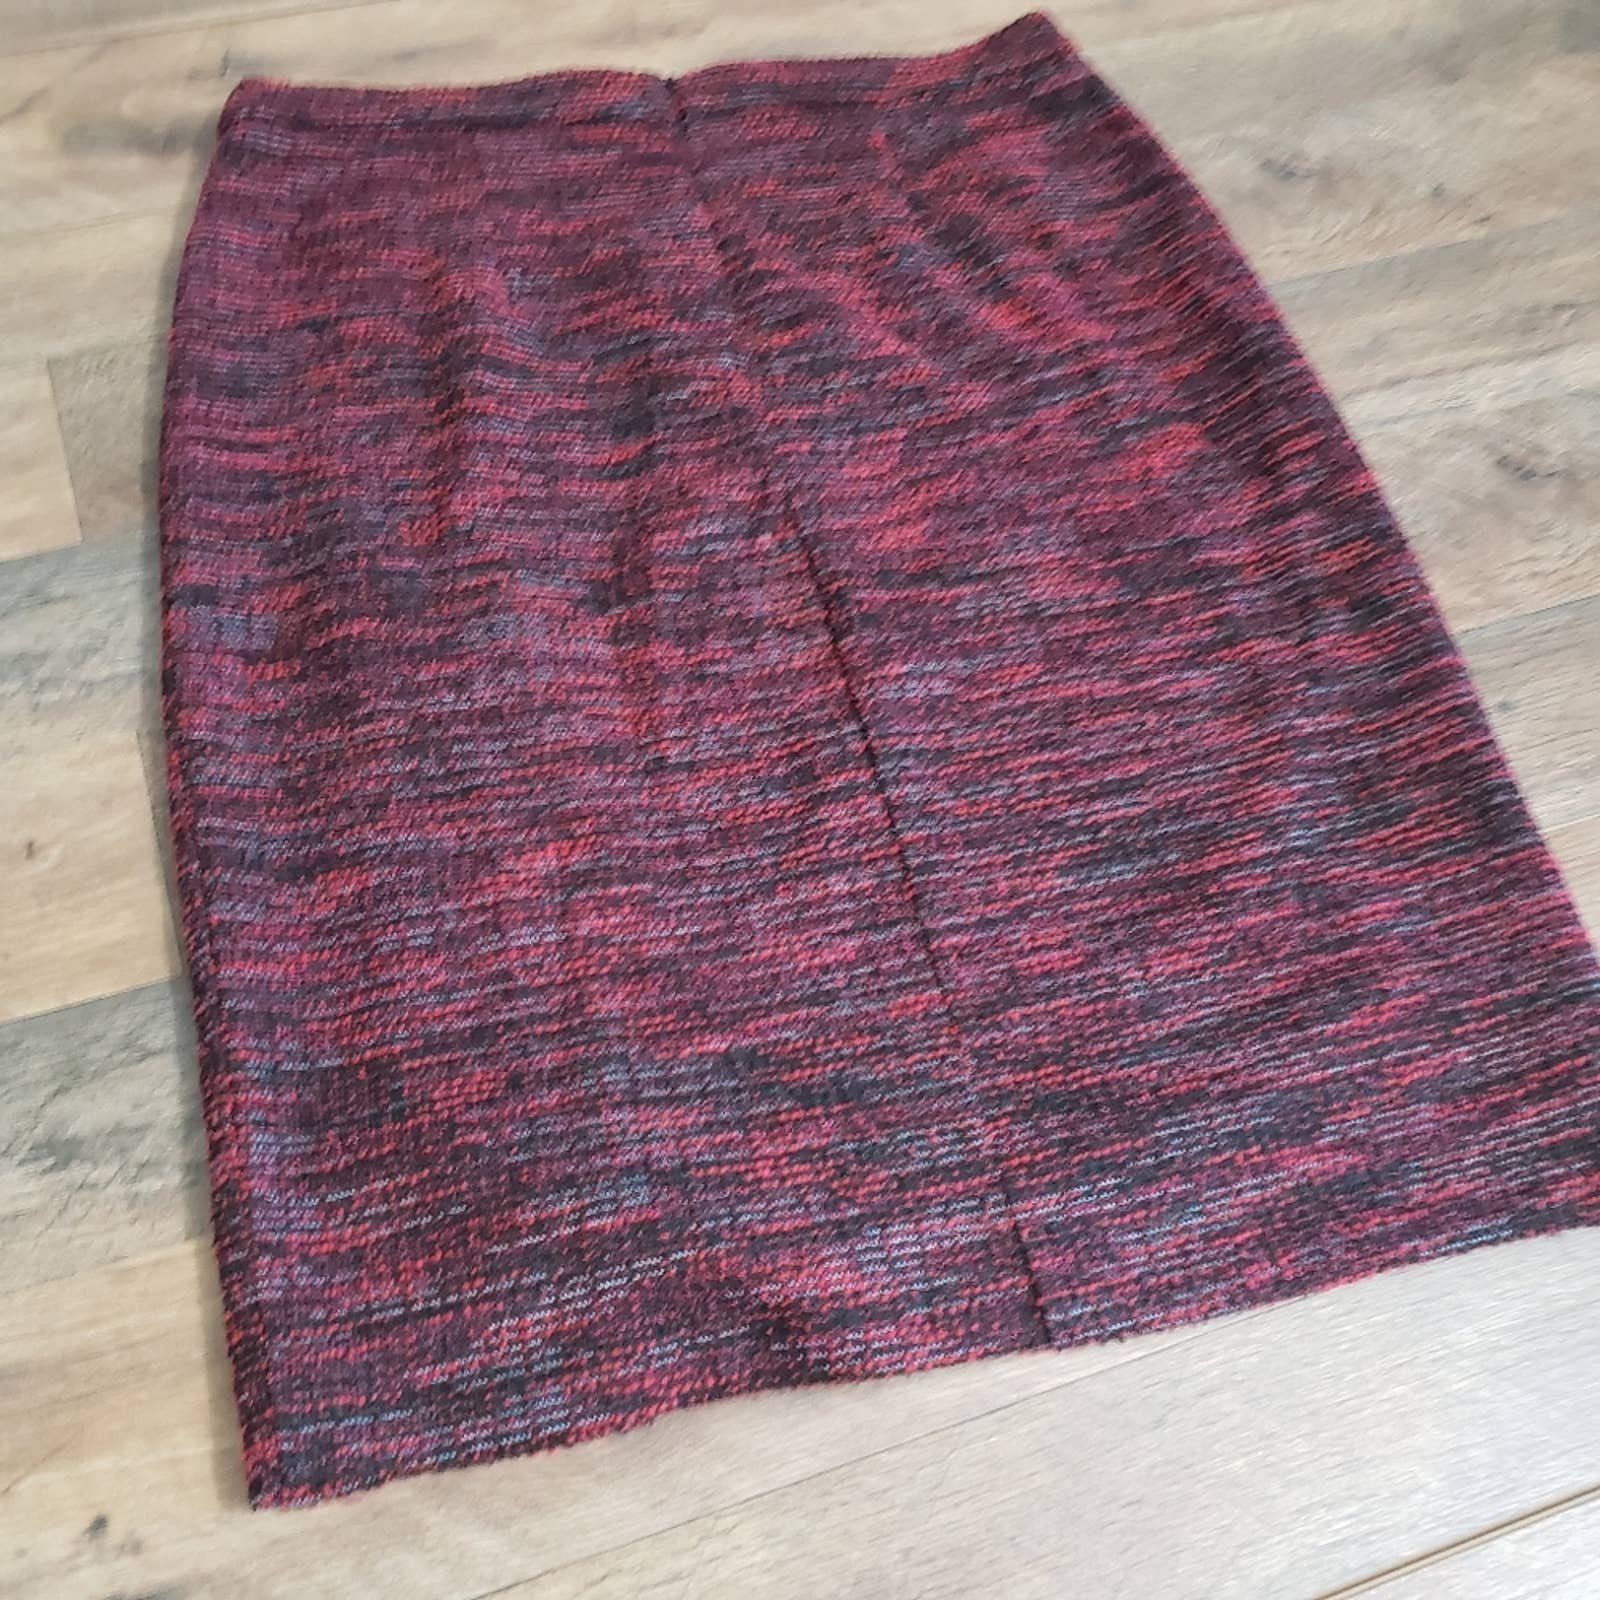 The Best Seller Ann Taylor Red Black Button Closure Midi Length Wrap Pencil Skirt Size 10 os8xuZc3g Counter Genuine 